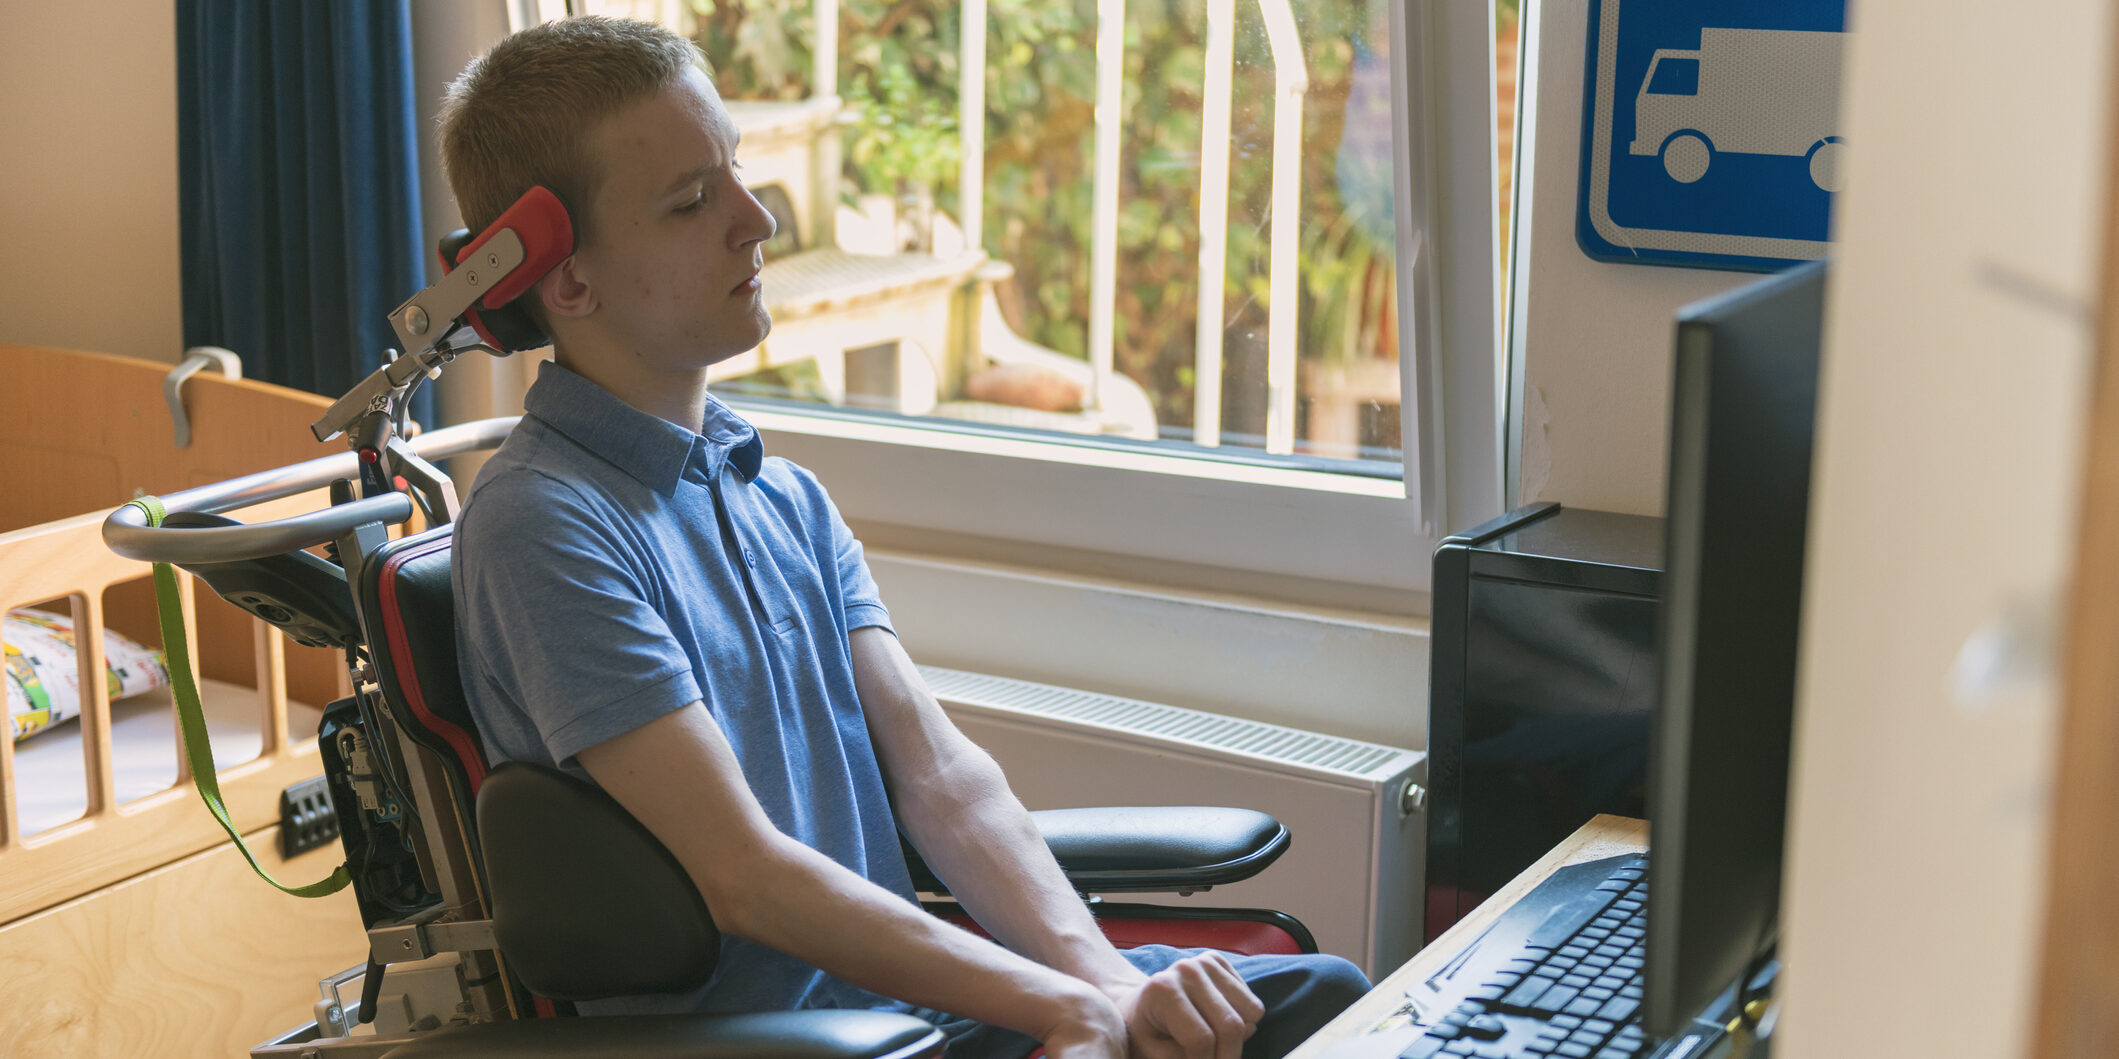 Color image of a real life young physically impaired ALS patient computer gaming with the help of his electronic wheelchair.